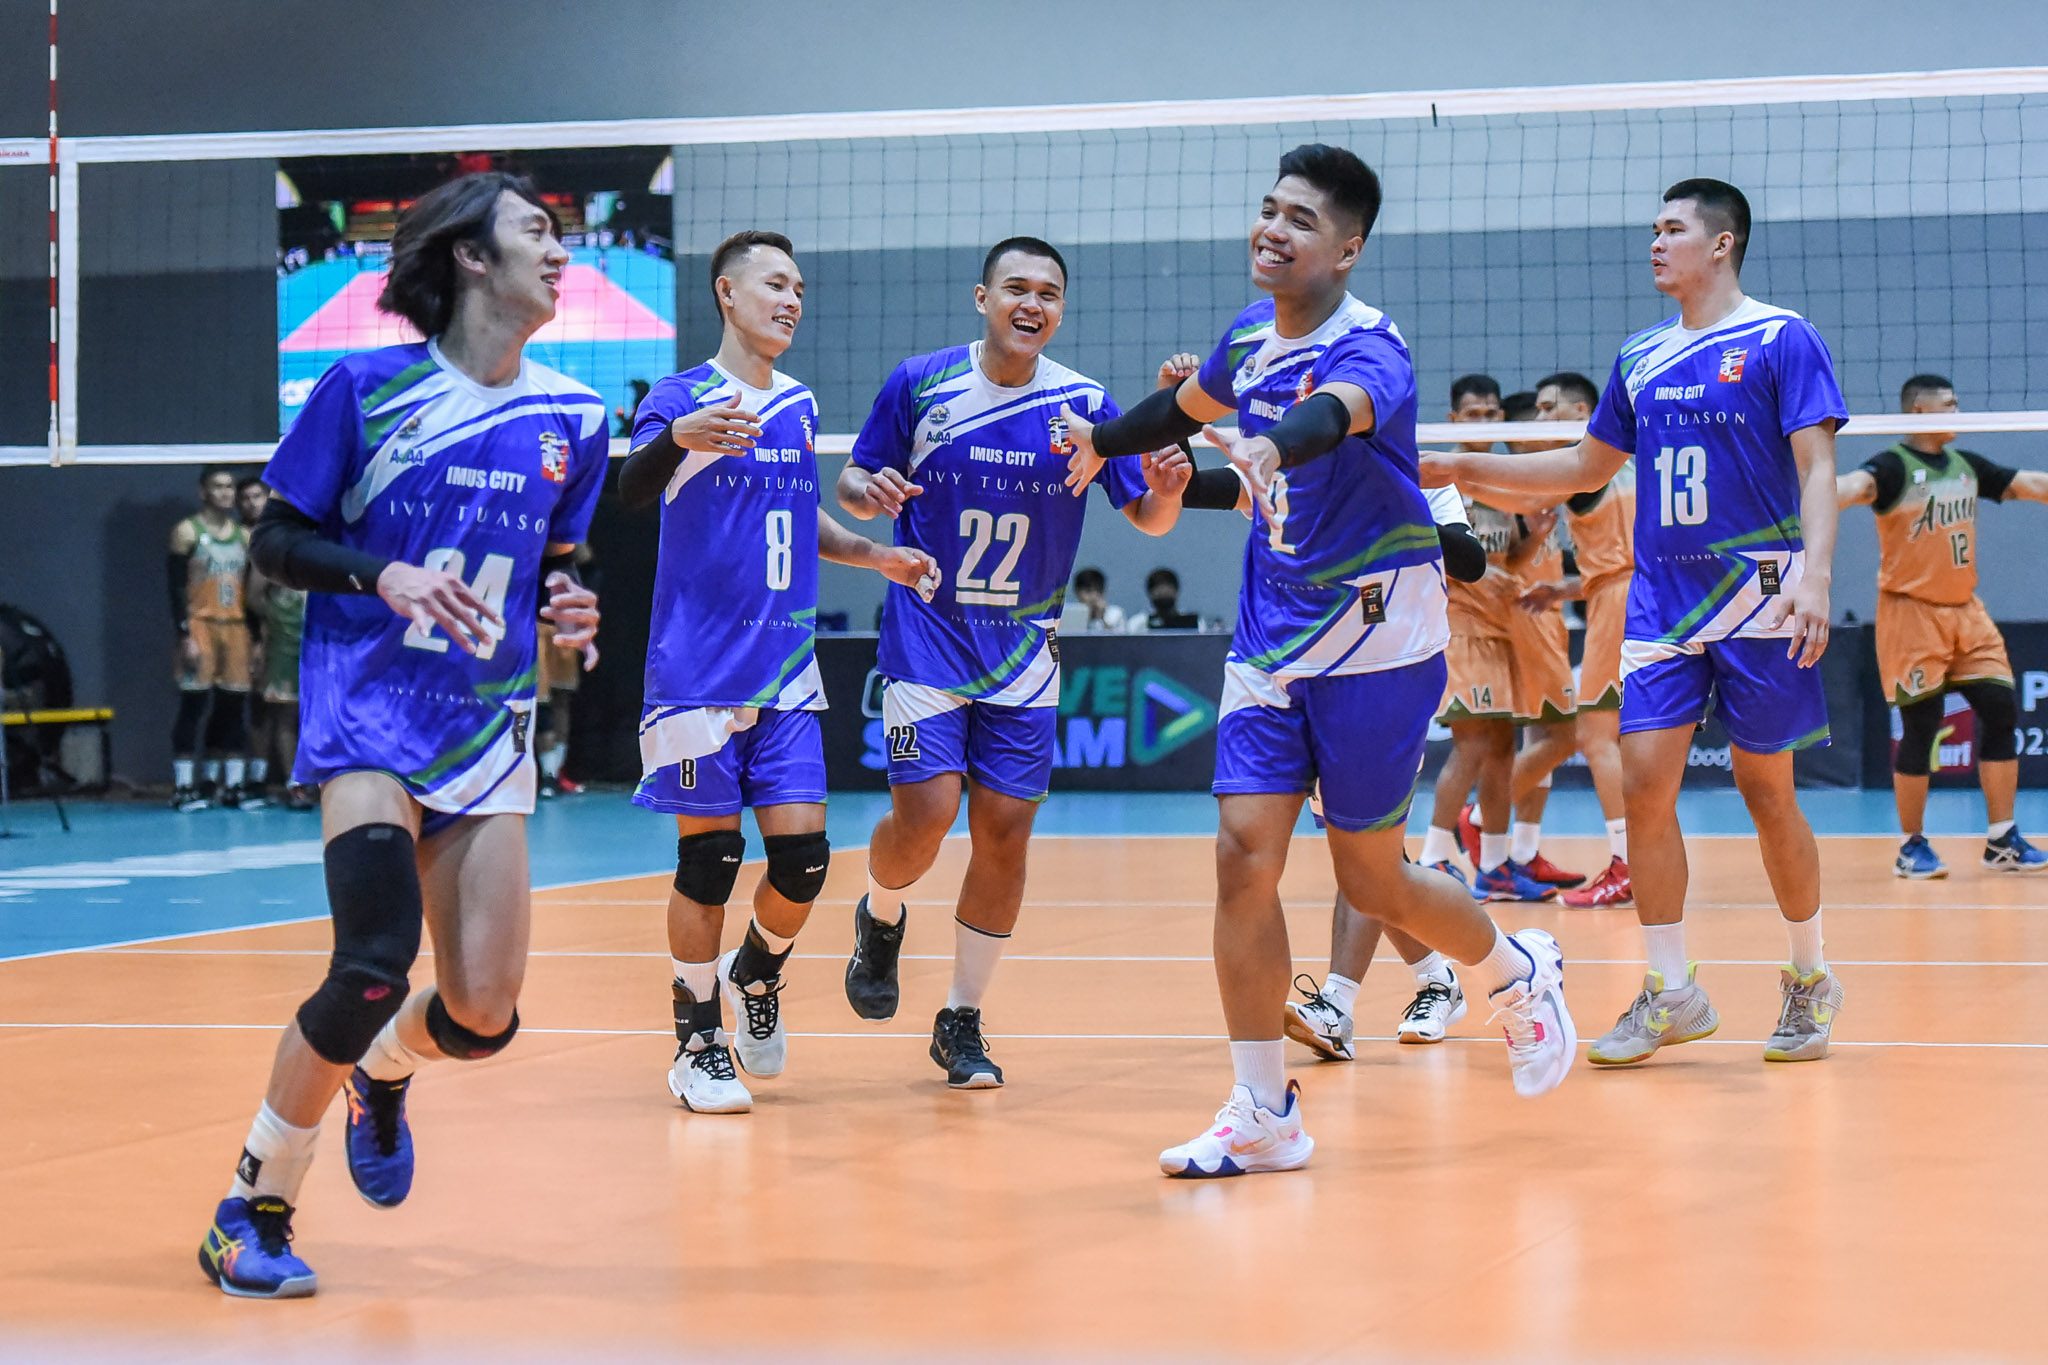 Spikers' Turf: Imus blasts Army in 4 for 5th win, Navy edges Vanguard